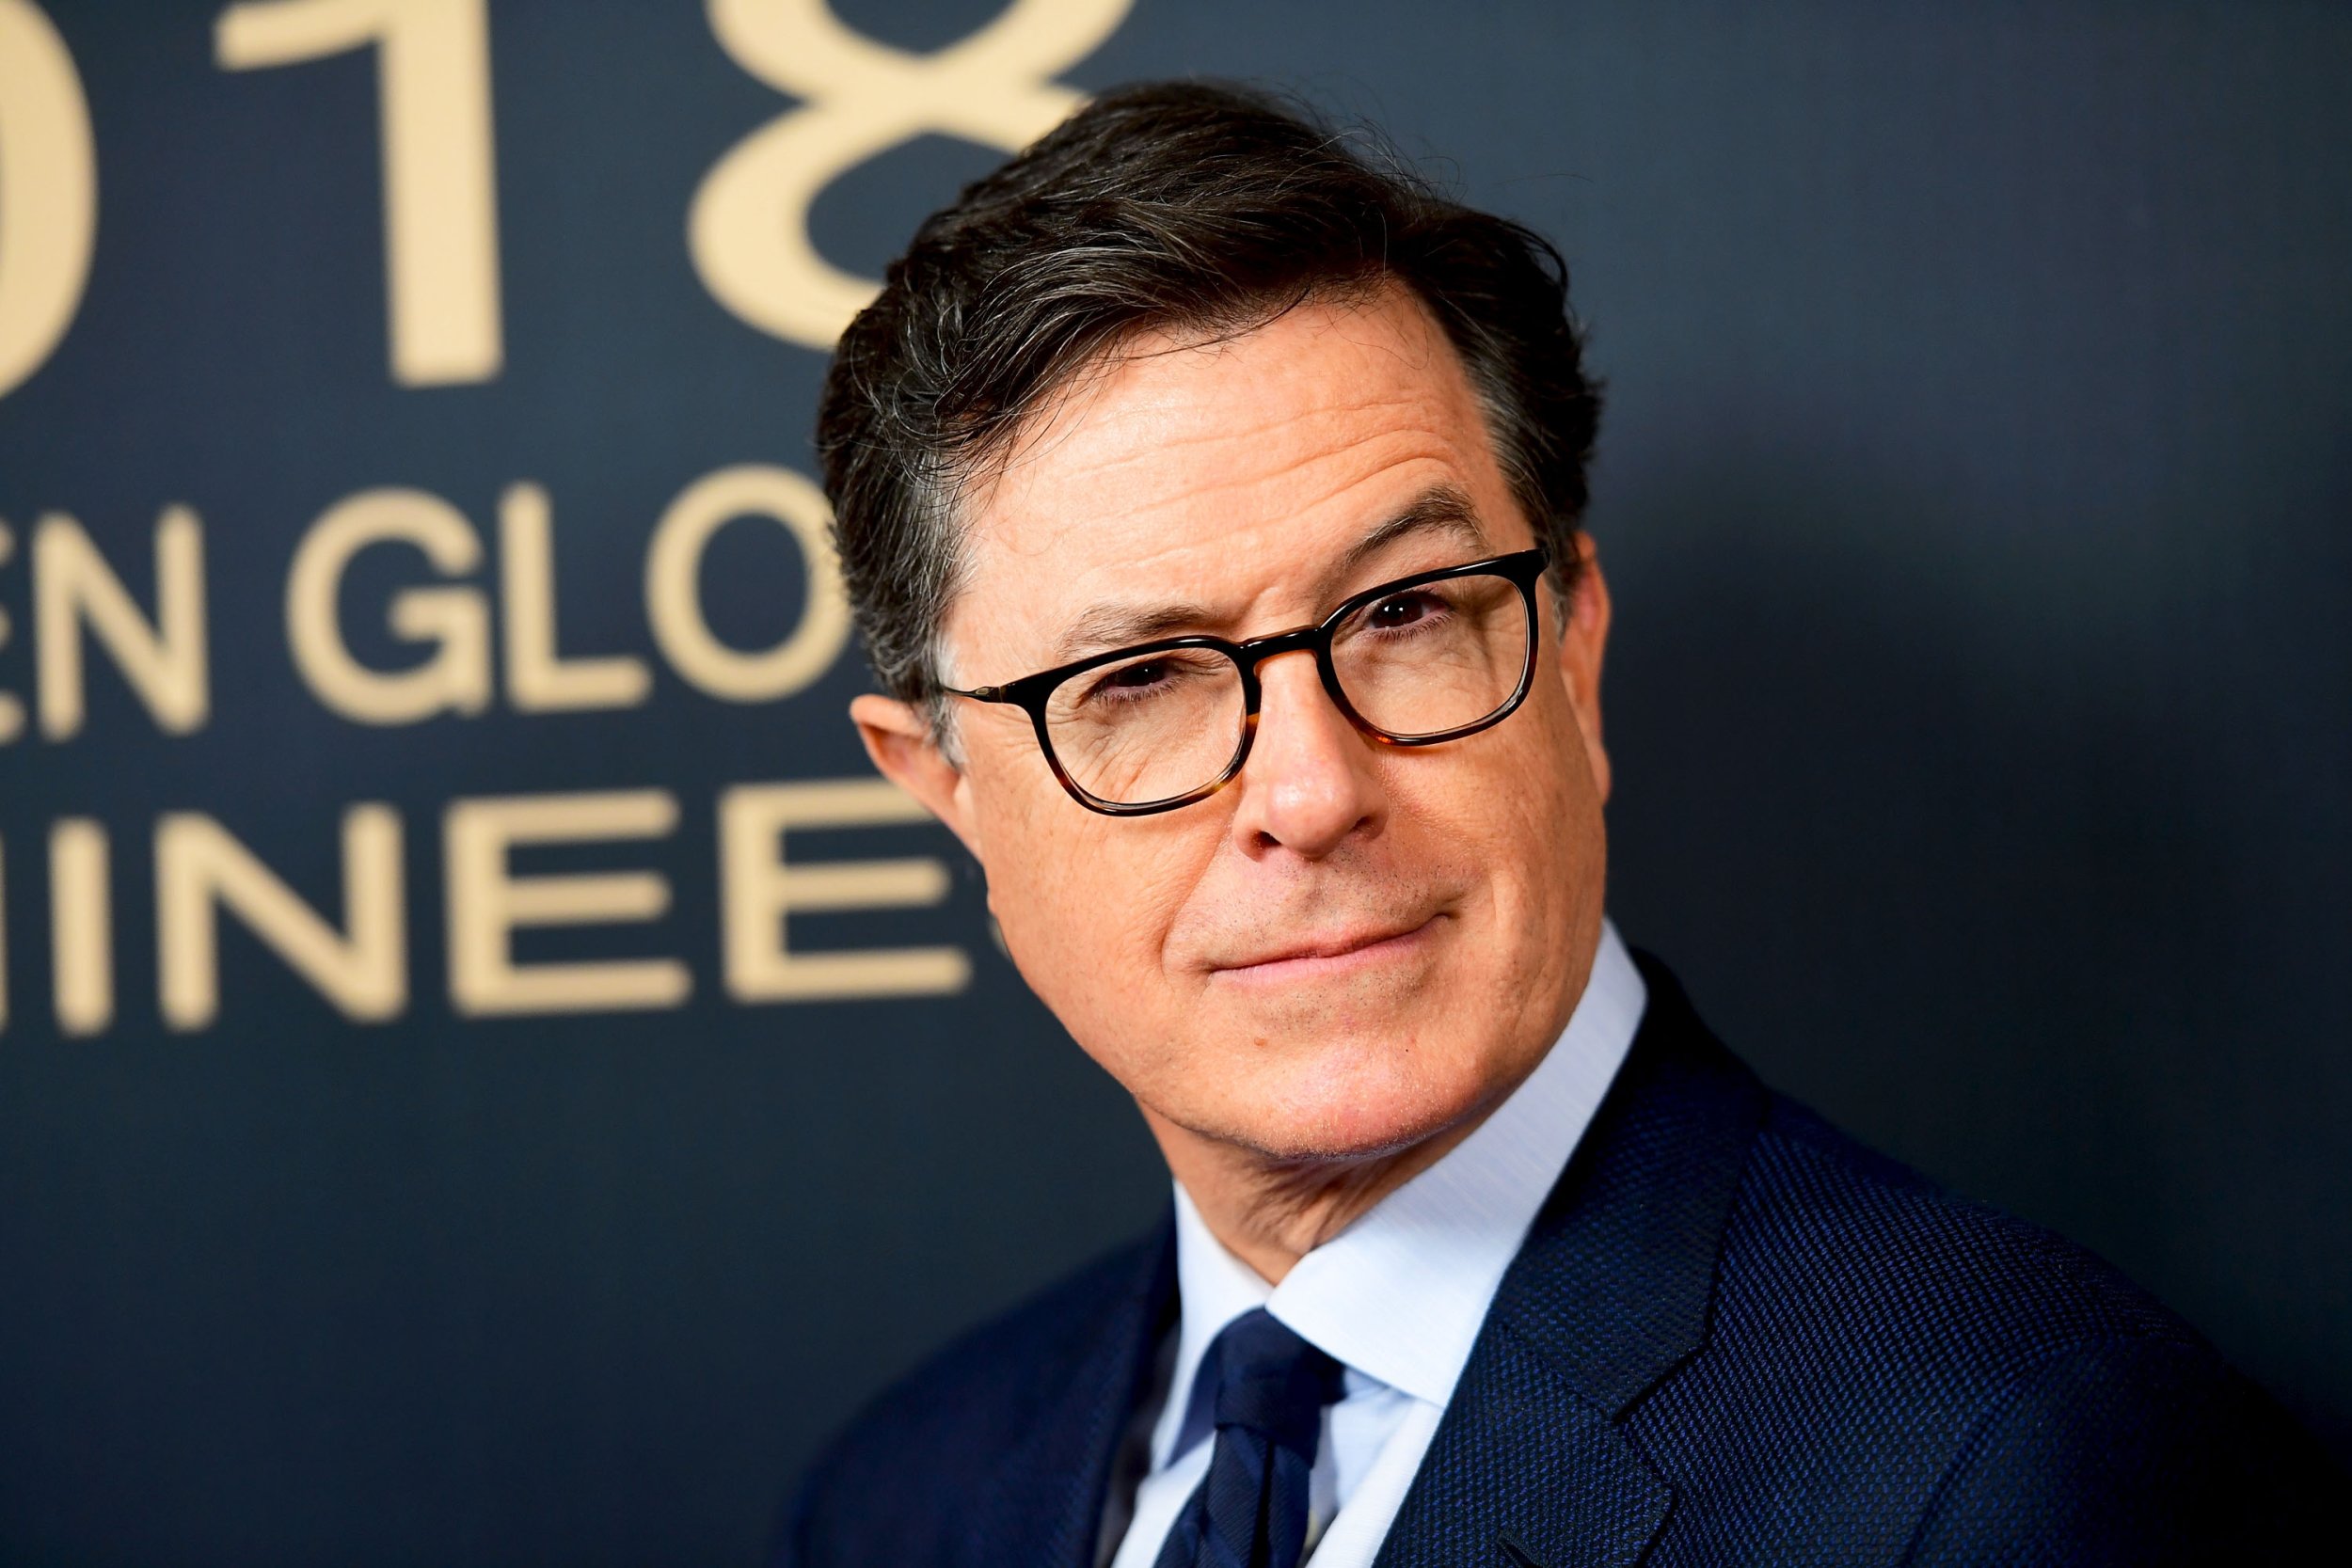 Stephen Colbert Pokes Fun At Prince Harry's Comments About 'Bald